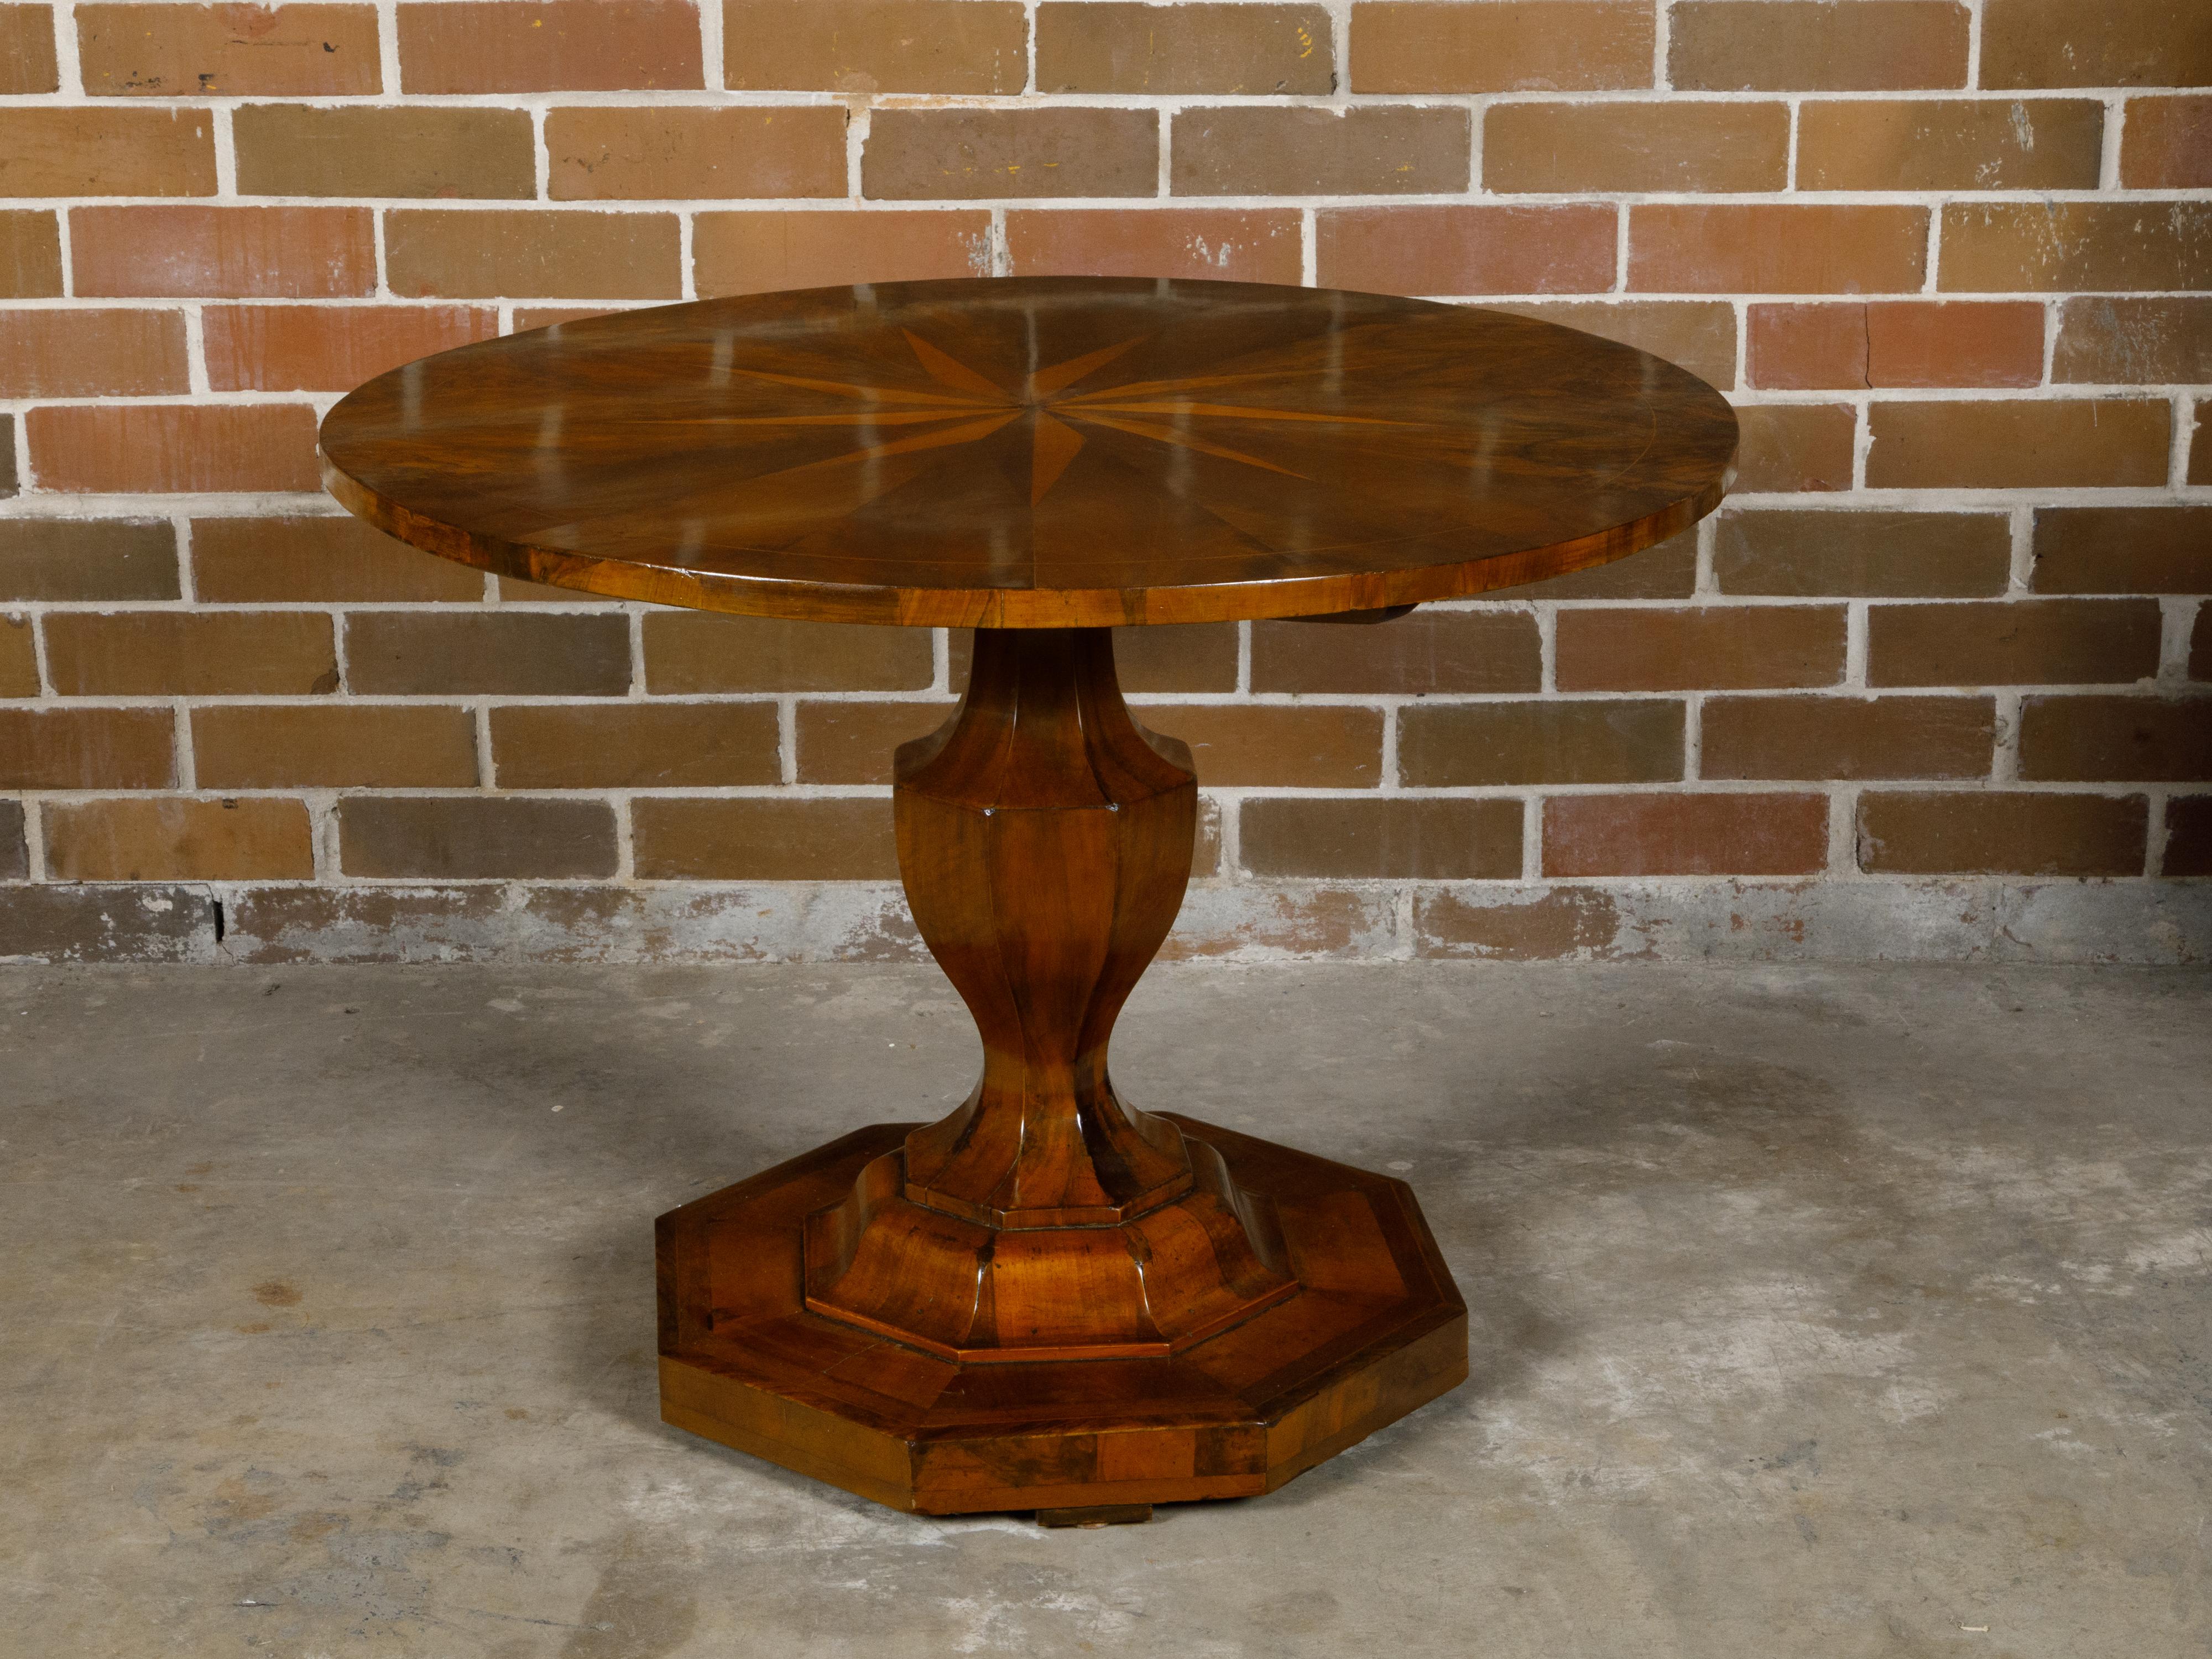 Biedermeier Period 19th Century Walnut Pedestal Table with Marquetry Top  For Sale 5